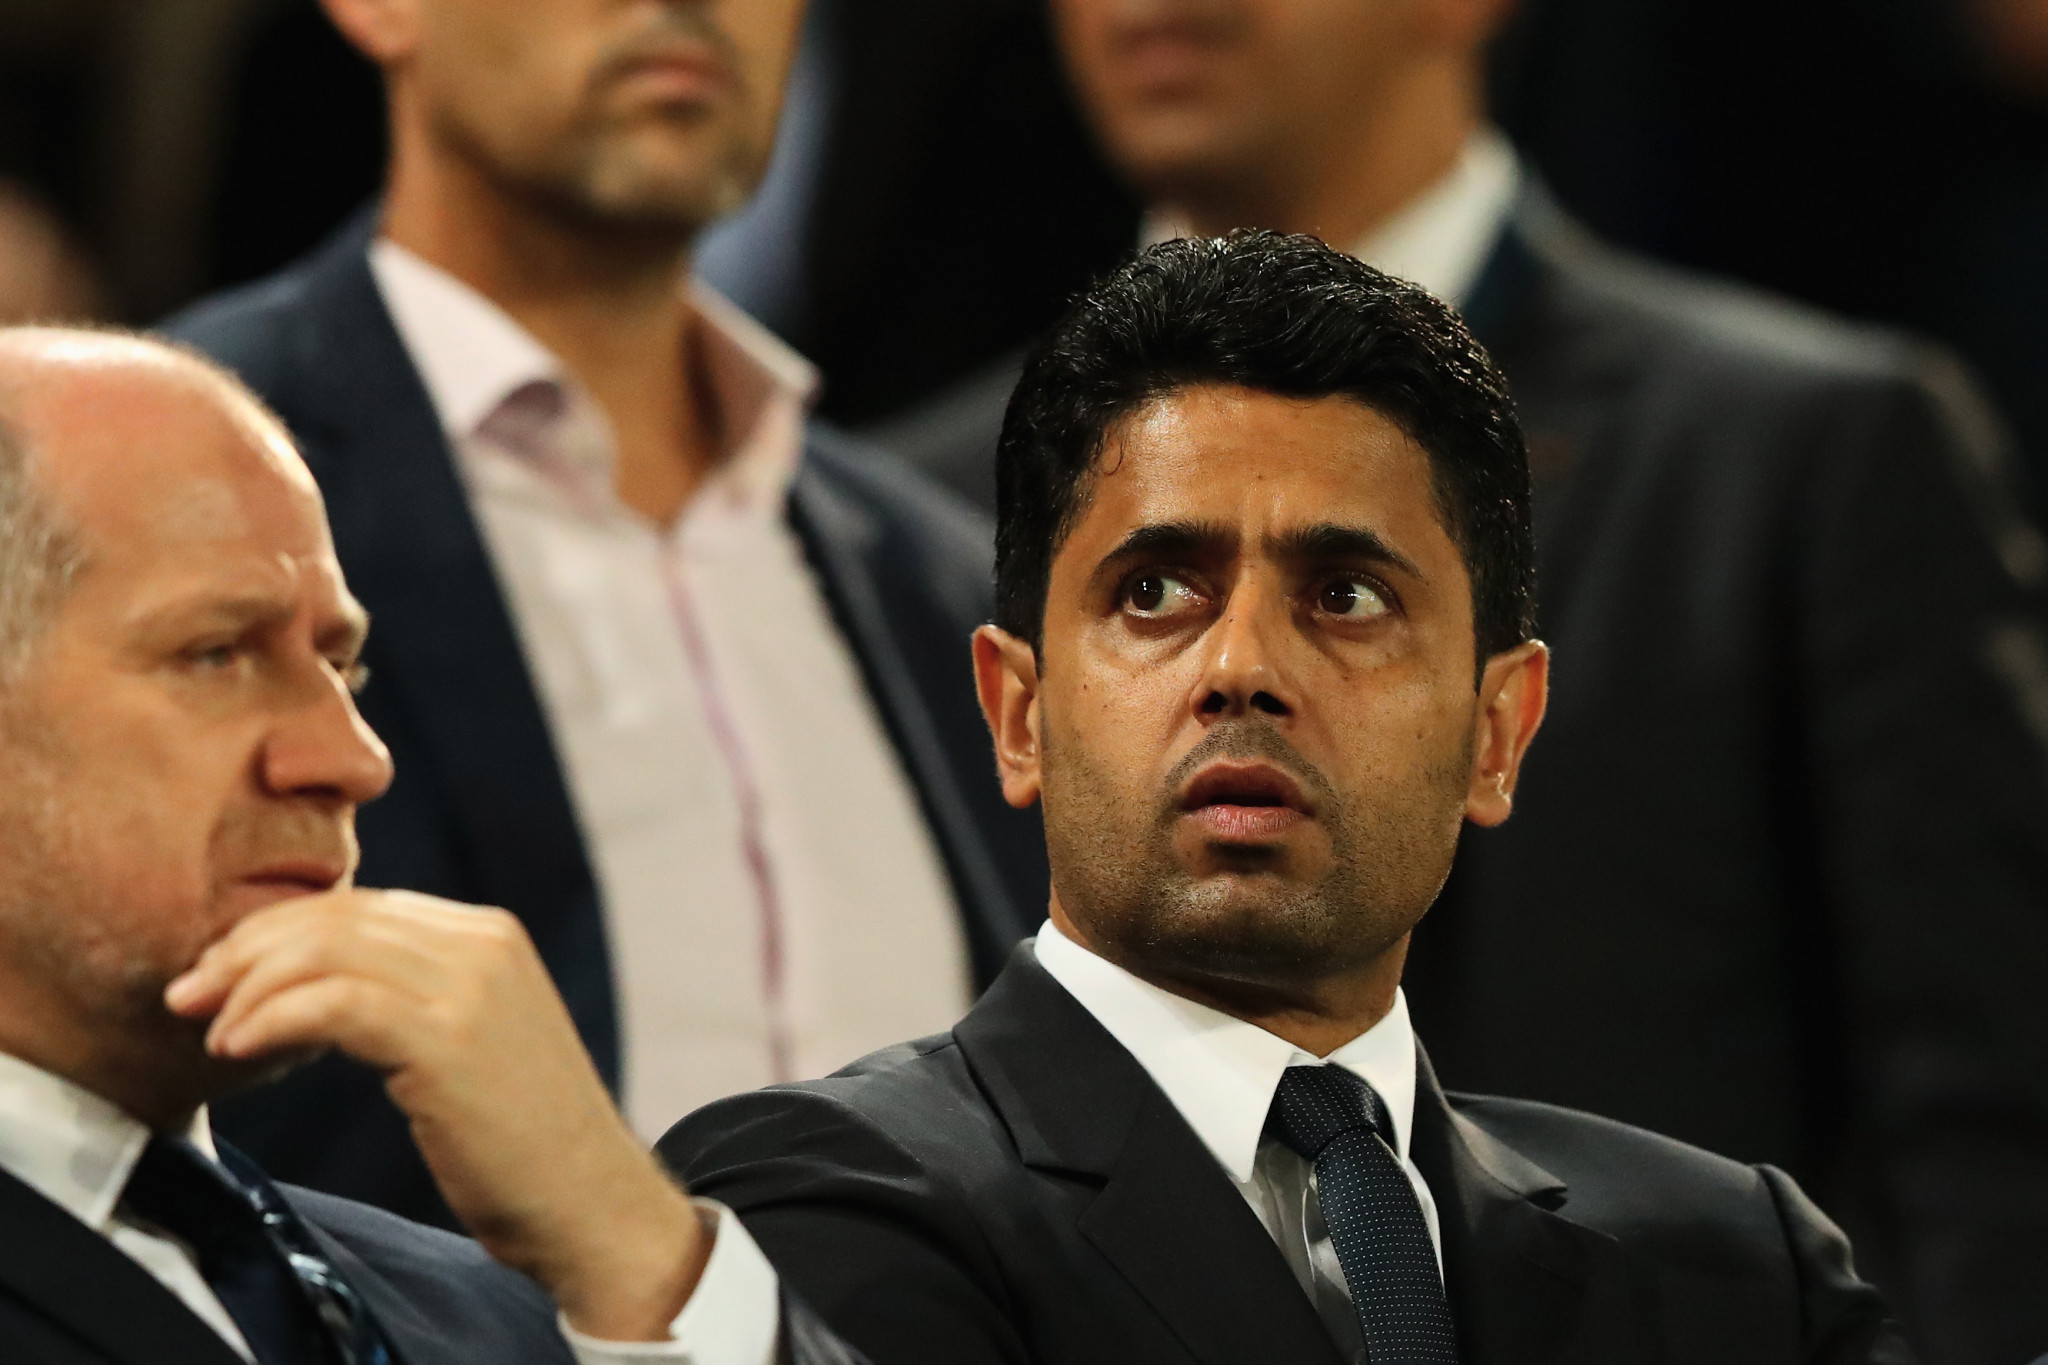 Al-Khelaifi to be questioned by Swiss prosecutors about Qatar 2022 rights investigation